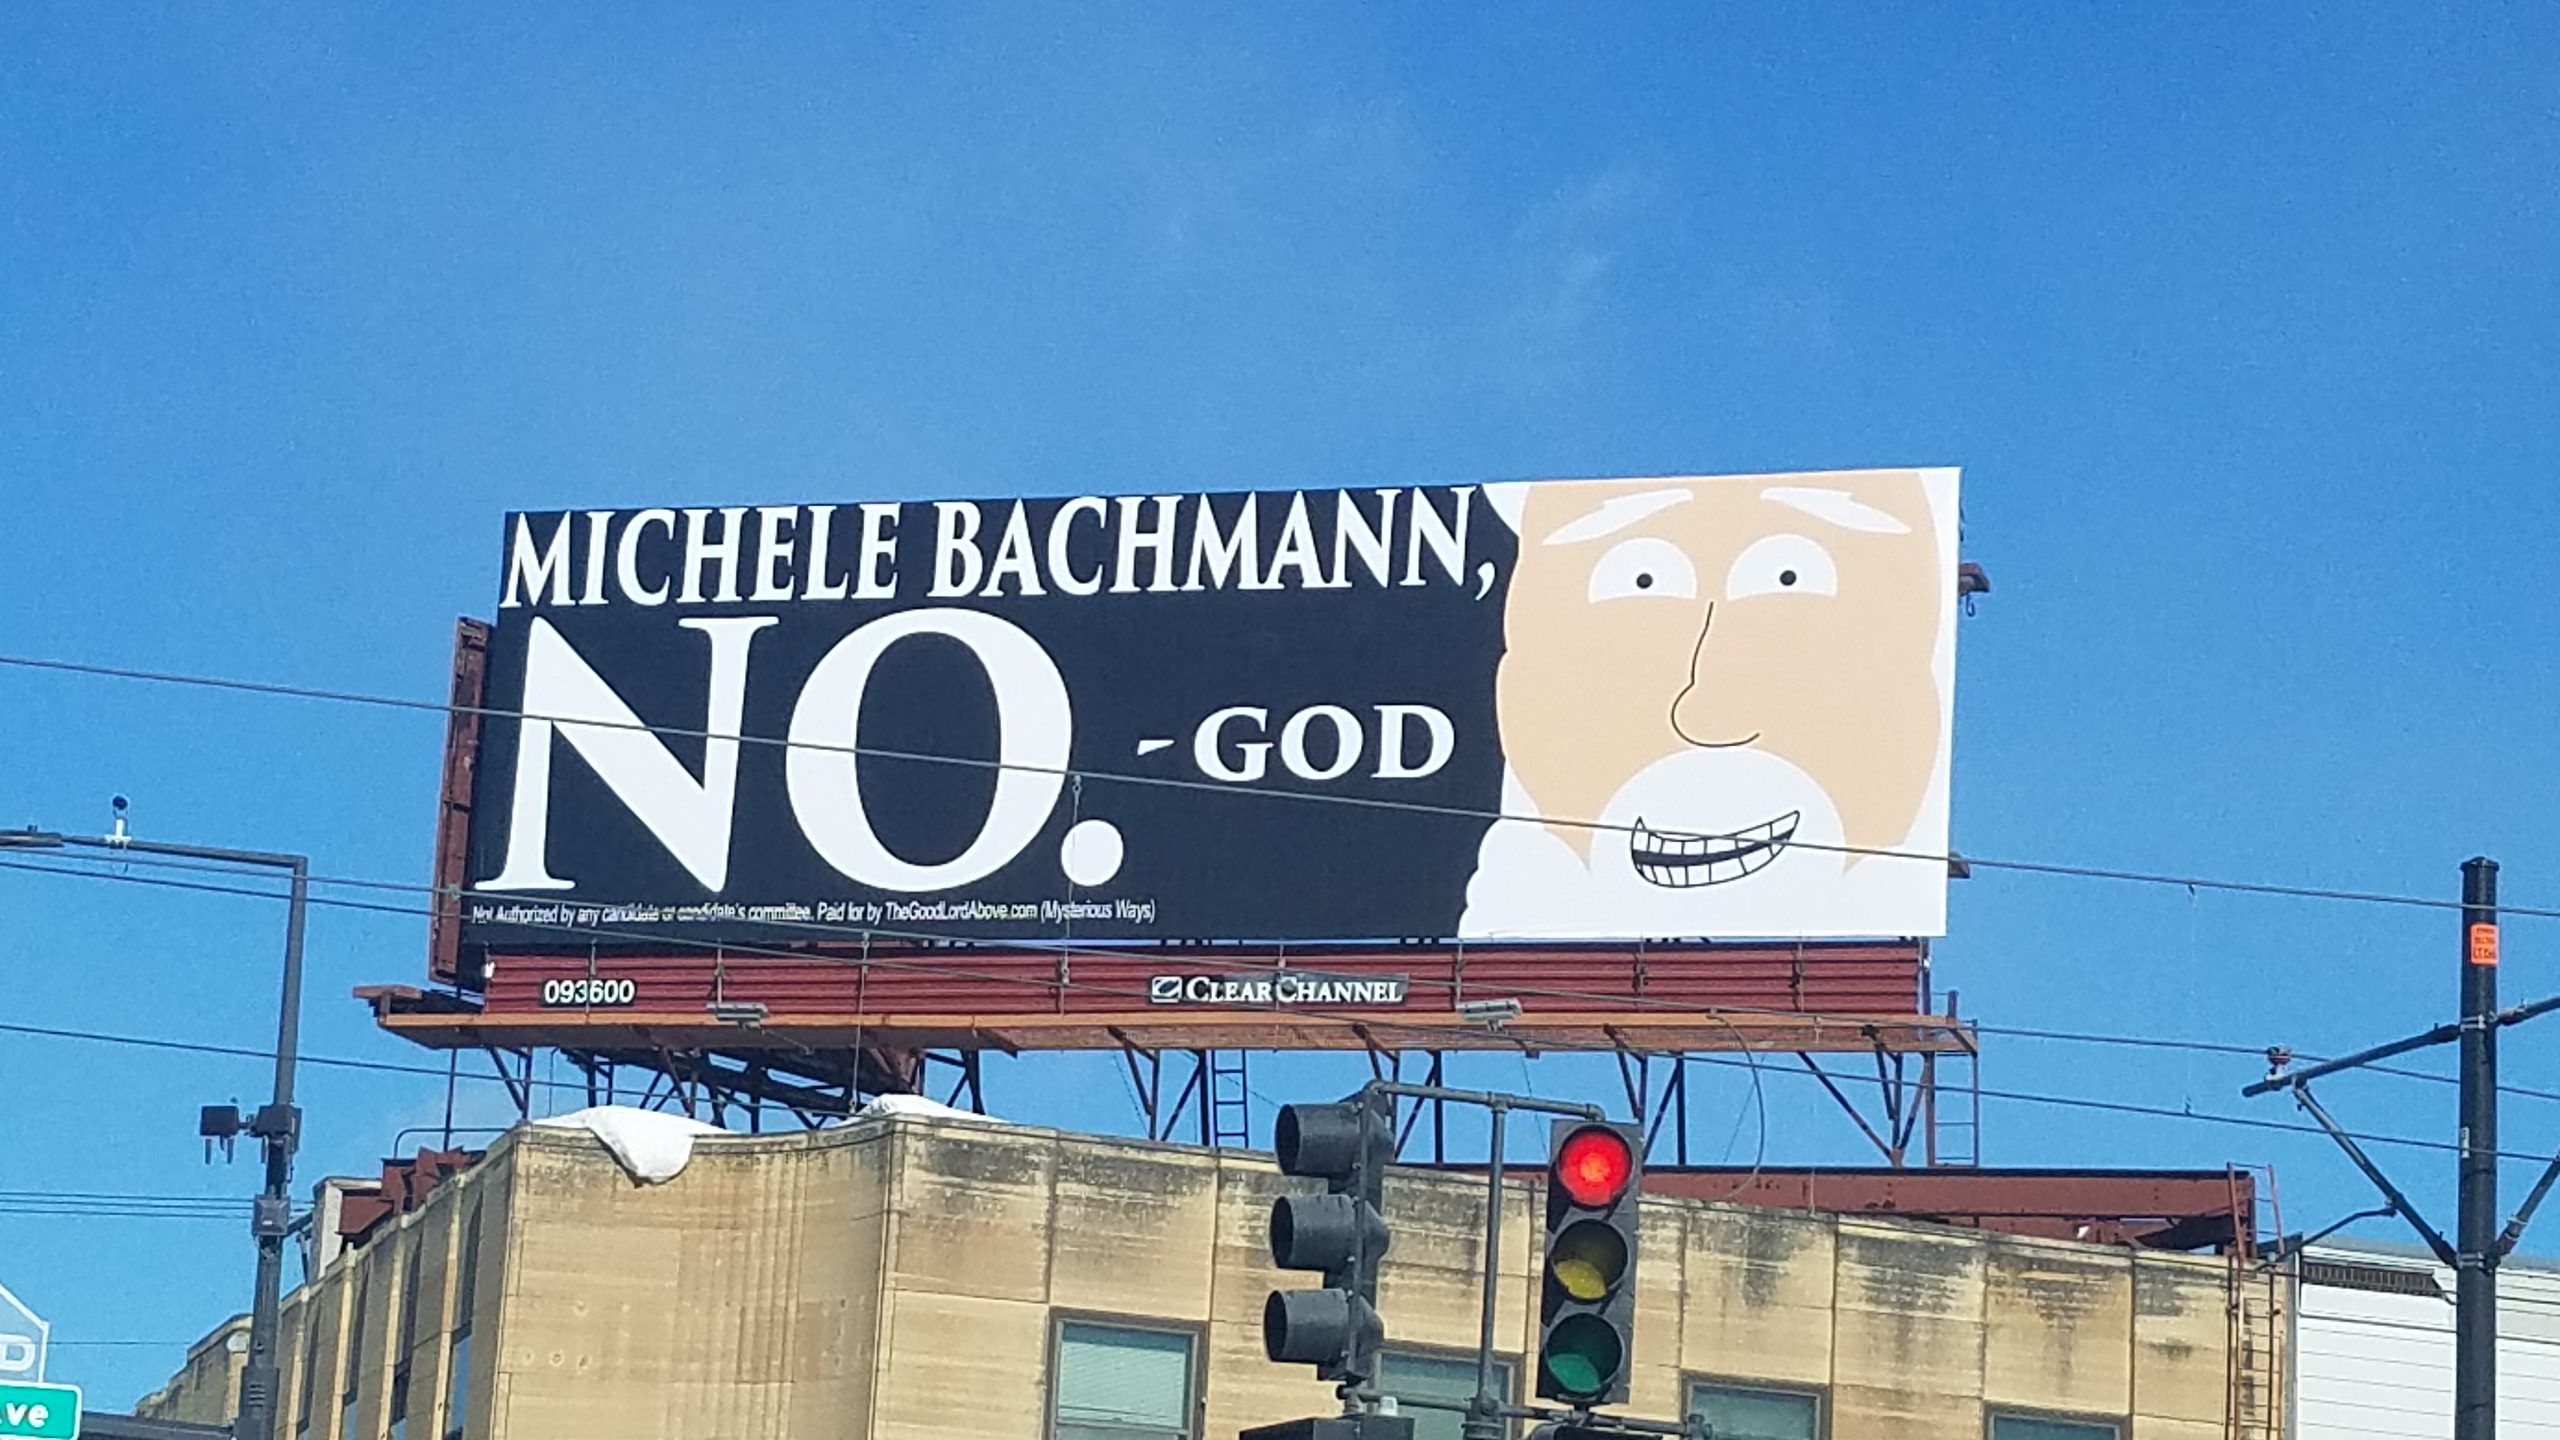 Michelle Bachman said she was waiting for a sign from God to run for Senate.